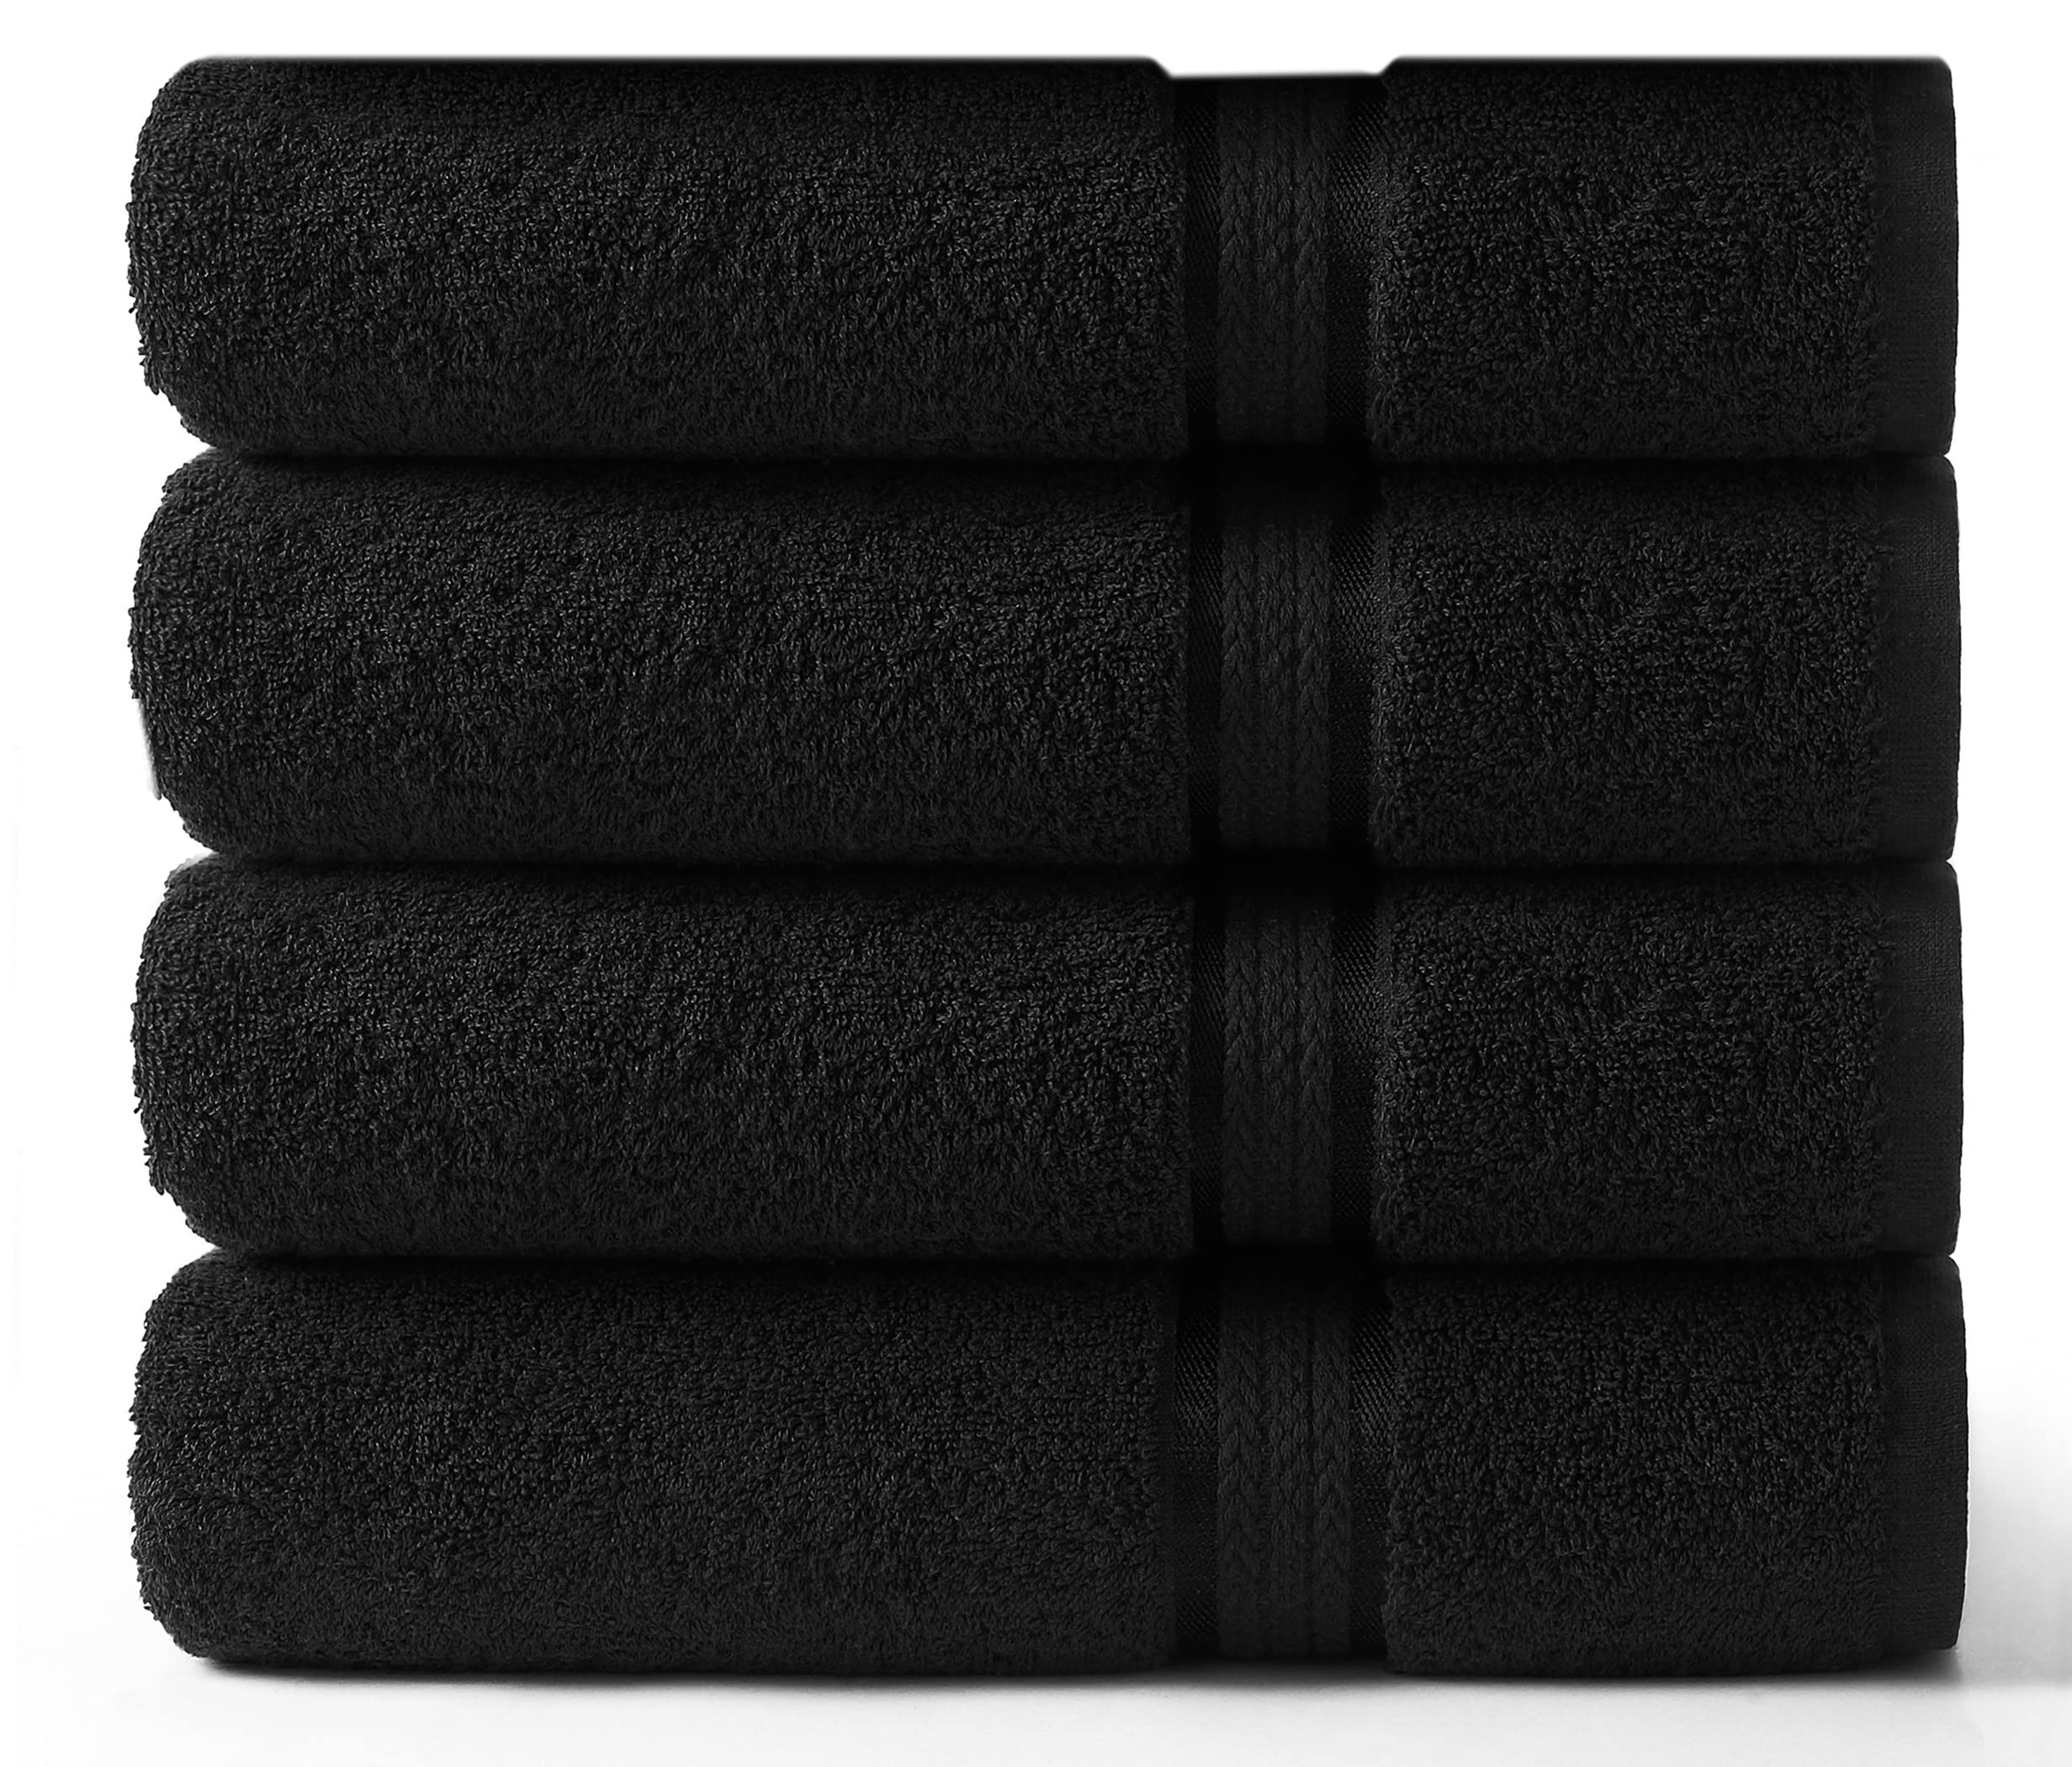 COTTON CRAFT Ultra Soft Oversized Bath Towels - 4 Pack Extra Large Bath  Towel Set - 30x54 - Absorbent